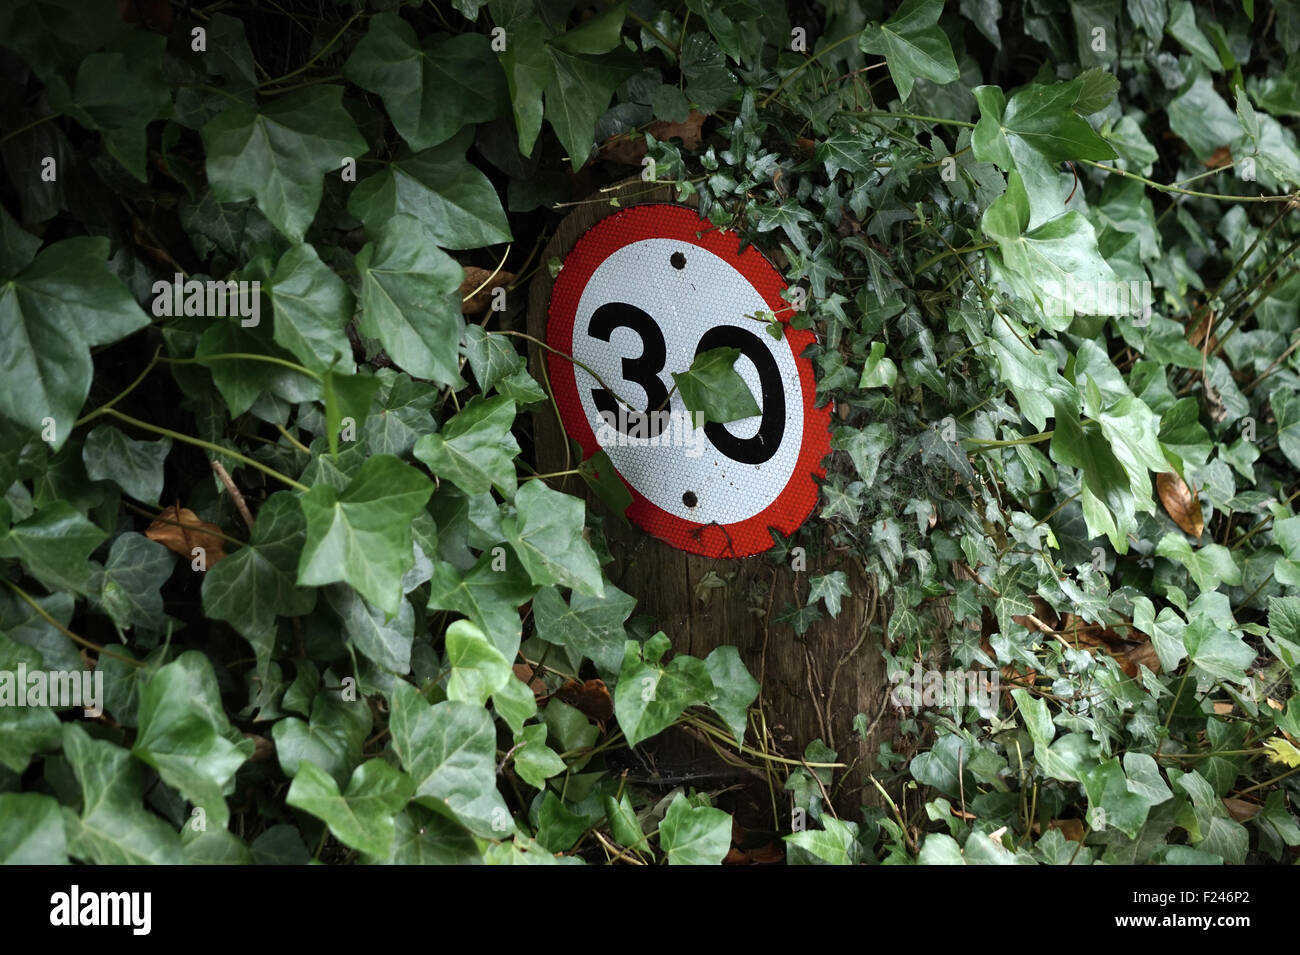 A speed sign for 30 mph obscured by ivy leaves, England UK Stock Photo